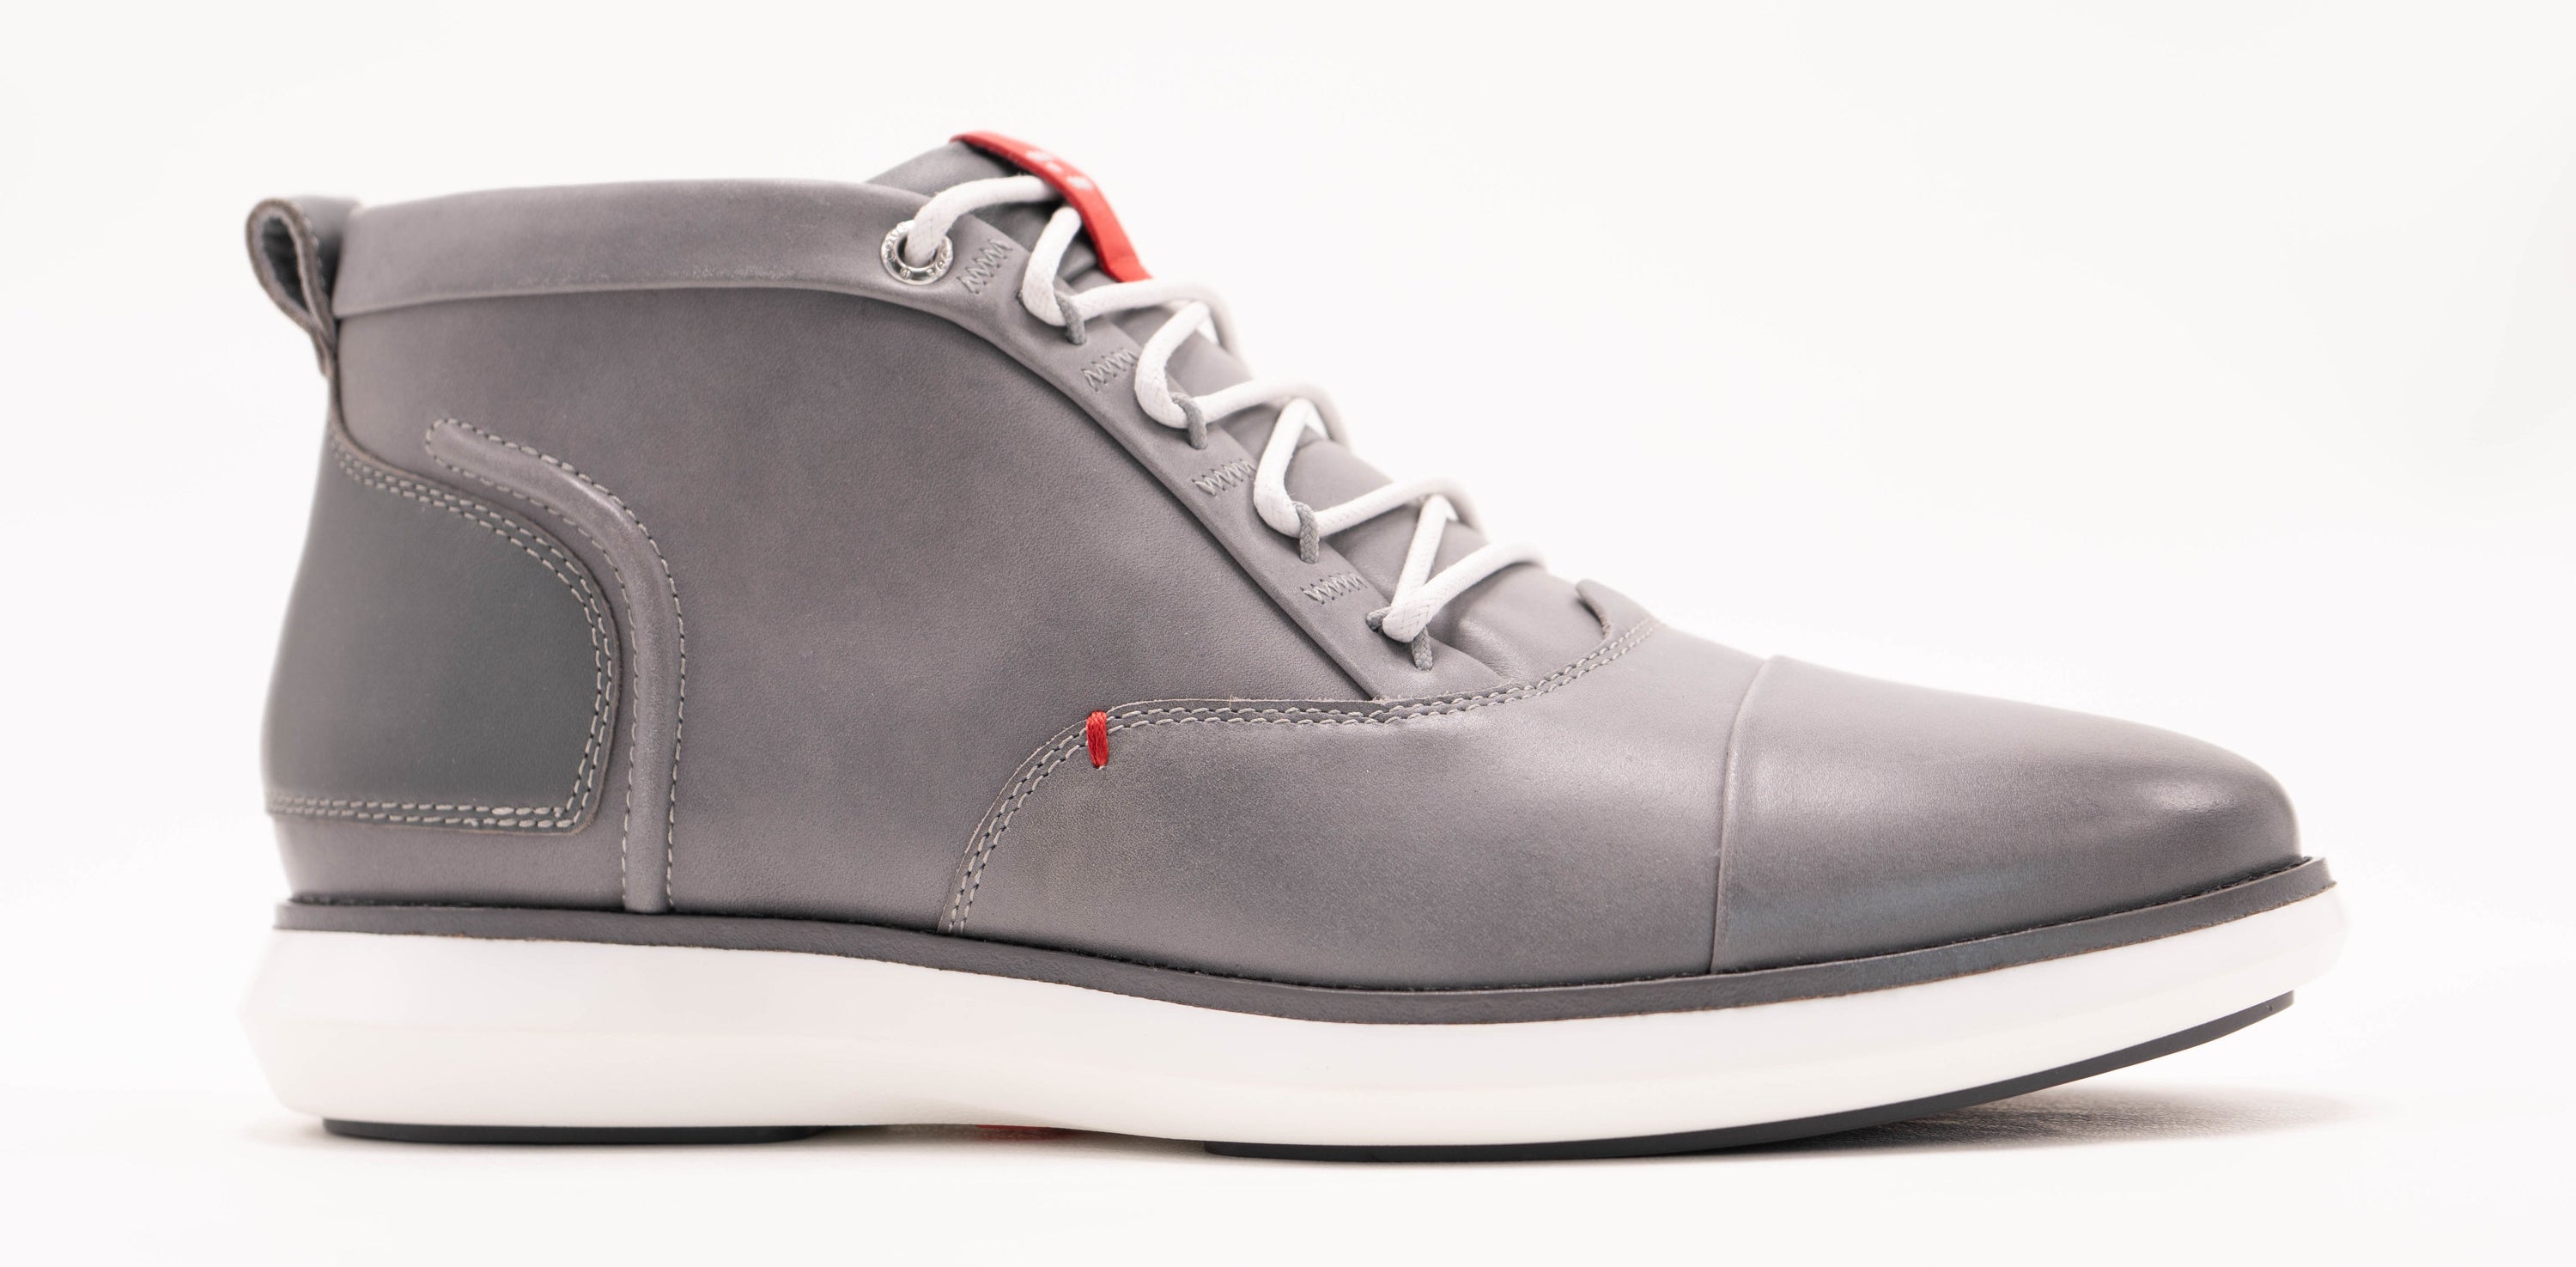 Code&#x27;s Entrepenuer shoe in a cool grey leather and white colorway